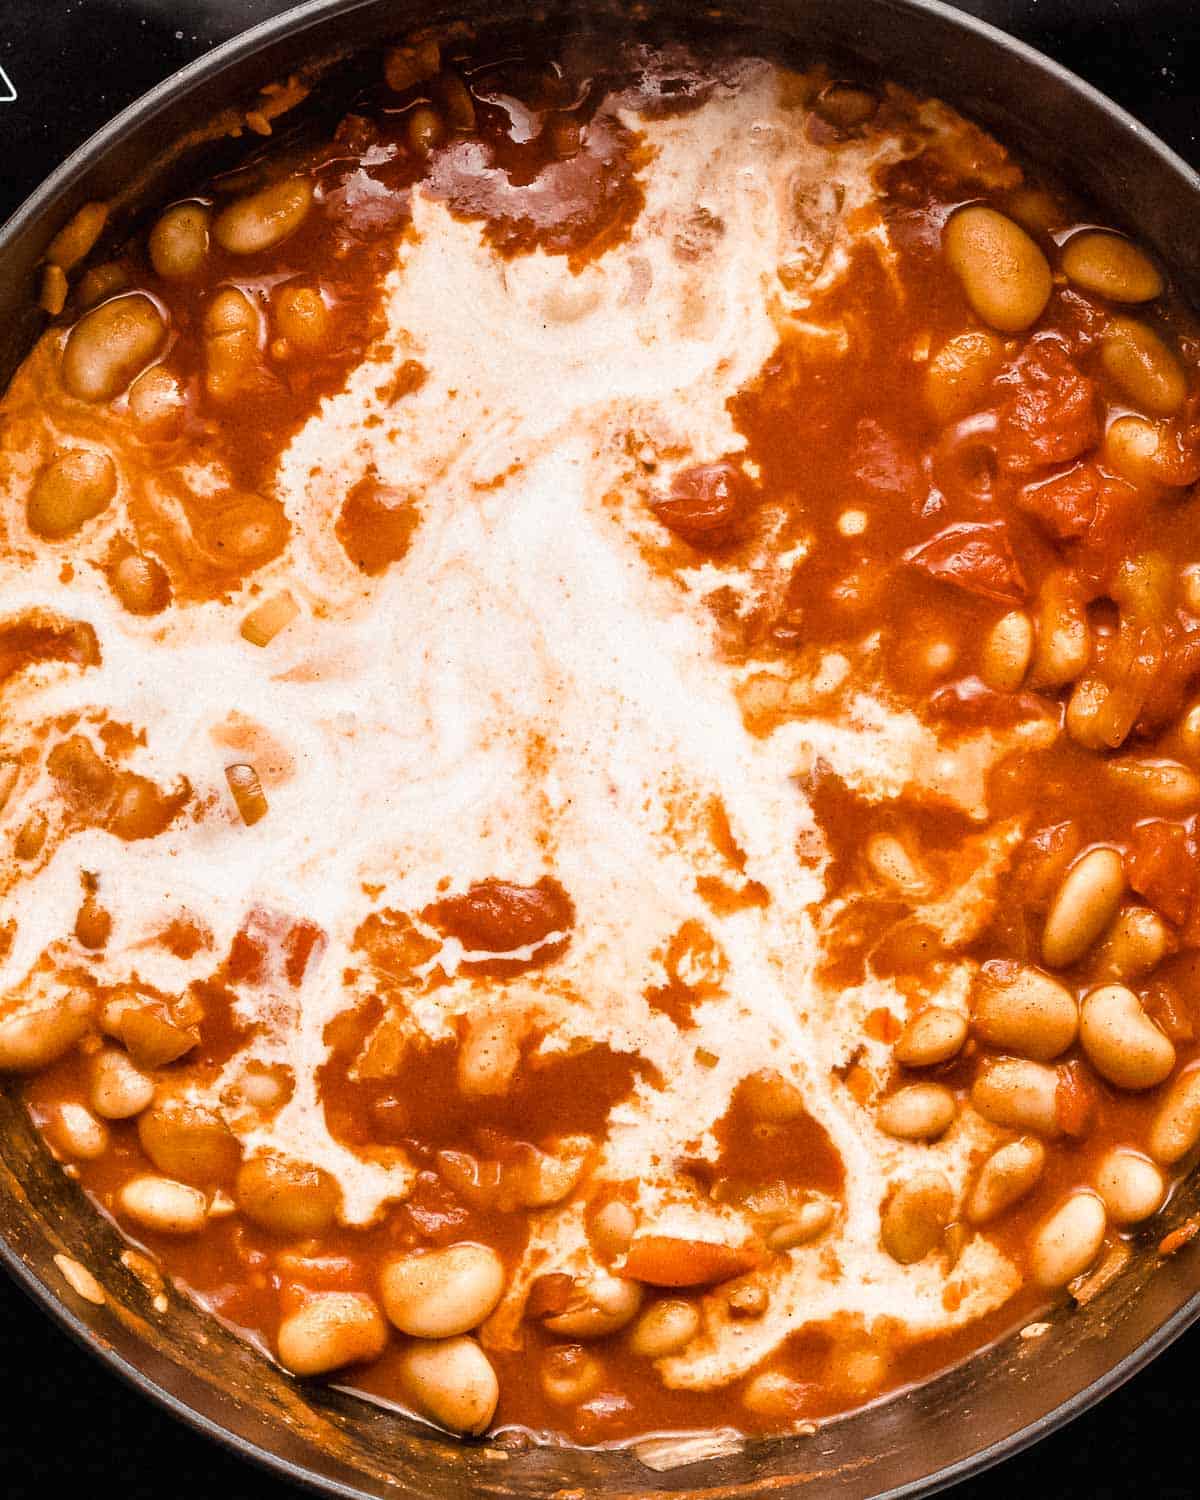 butter beans in tomato sauce with coconut milk added in a pan.